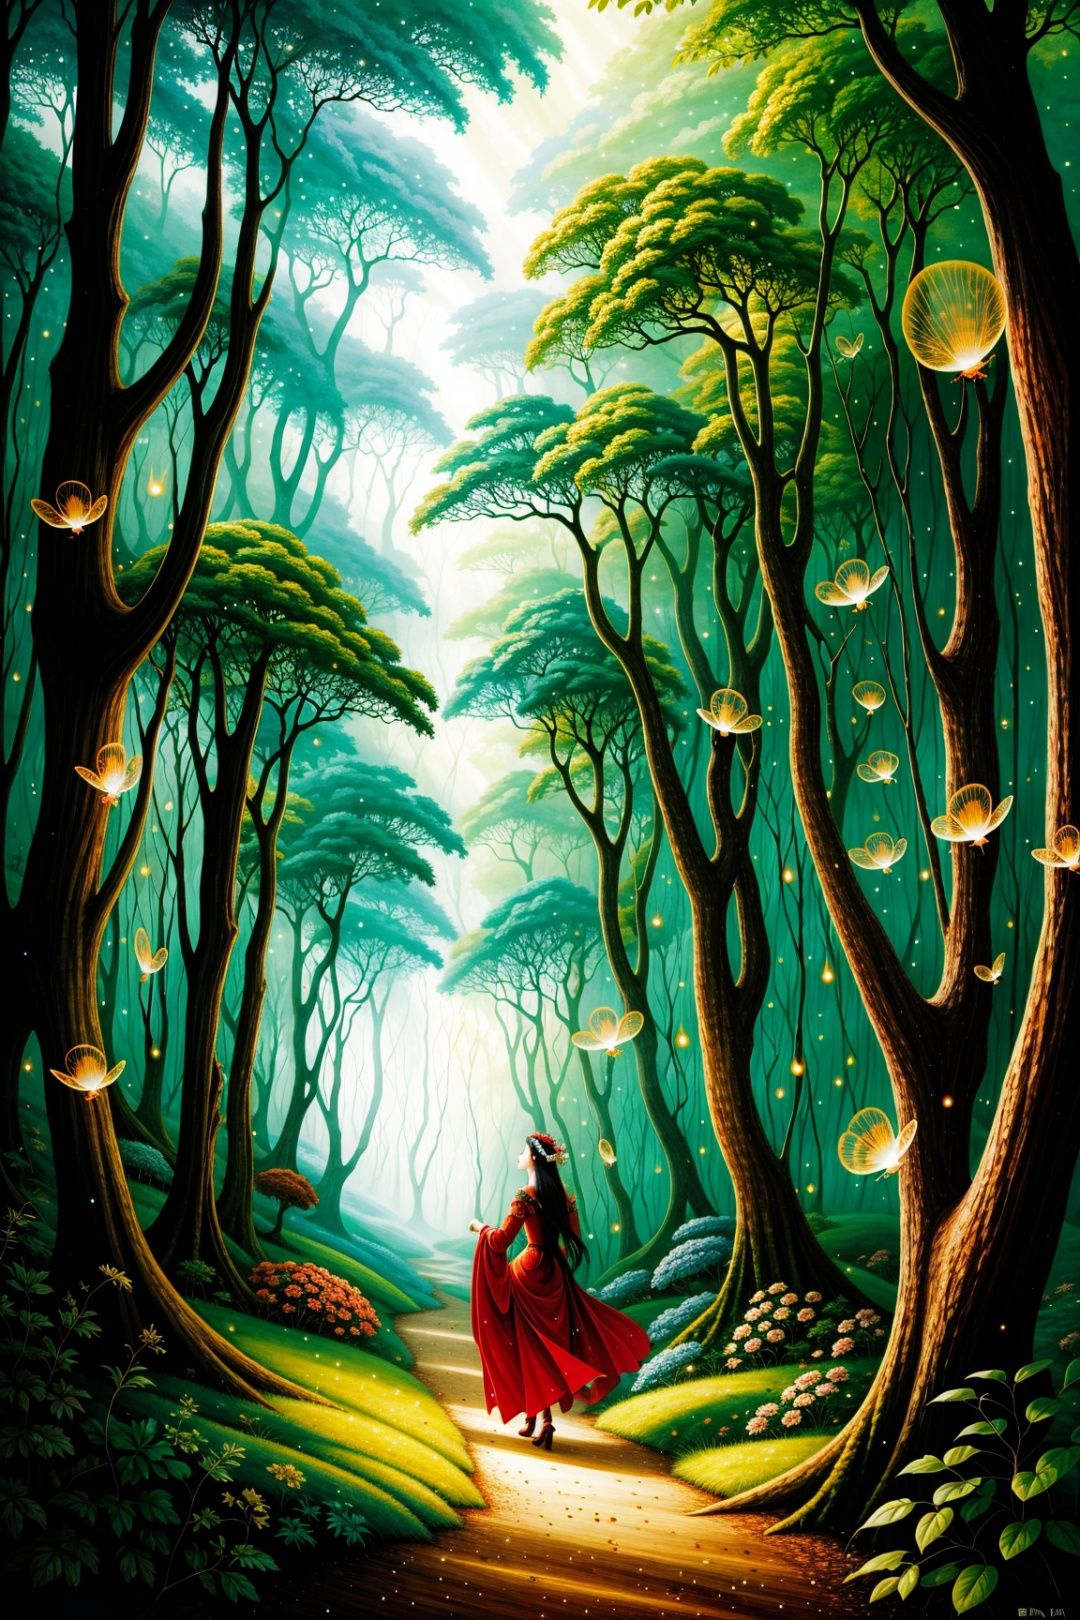 illustration by brian froud, Ultra-high resolution, dreamy perspective,a lady finds herself in a fantastic forest with towering trees radiating a mysterious light from their canopies. She walks down a path and encounters magical creatures and breathtaking plants, glowing fireflies on the grass and surrounded by glowing rubies, ultra detail, frosty anime stye,by Dongli for flyingsnow model